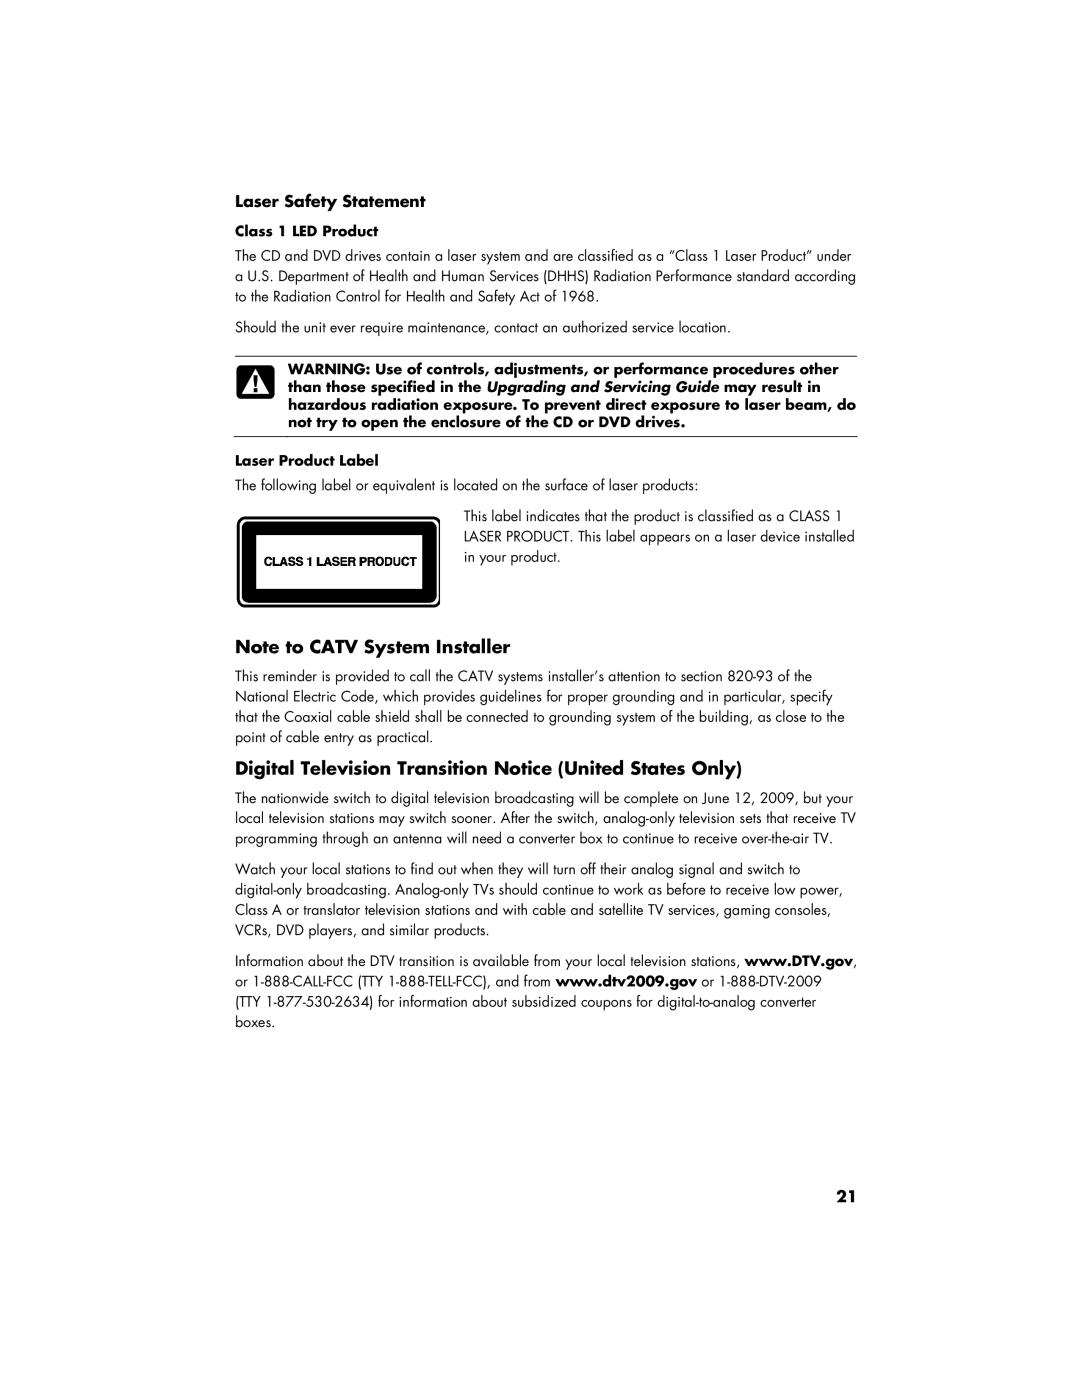 HP SR5027CL, a1777c Digital Television Transition Notice United States Only, Laser Safety Statement, Class 1 LED Product 